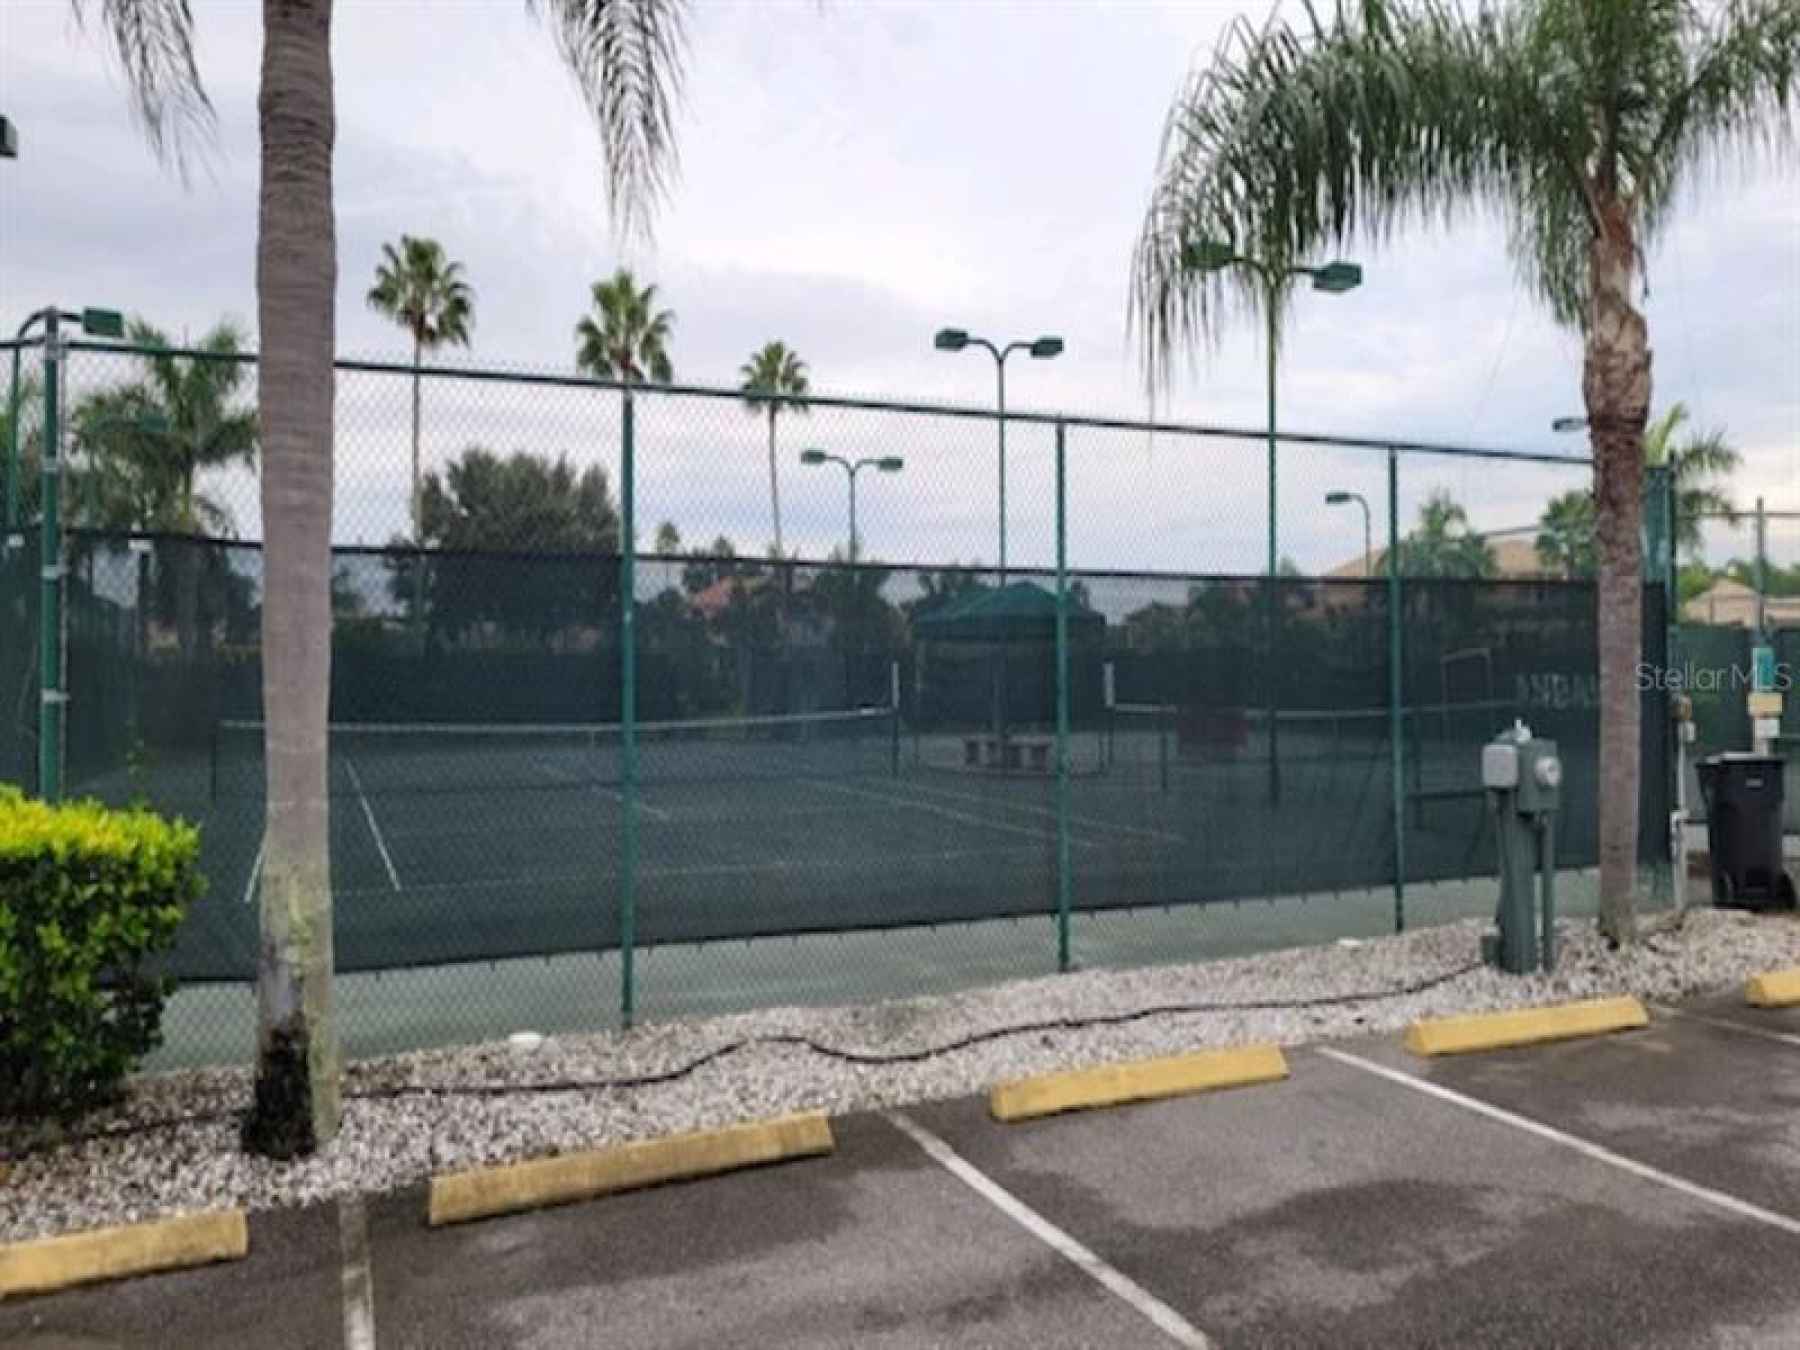 Tennis Courts Across The Street From Home